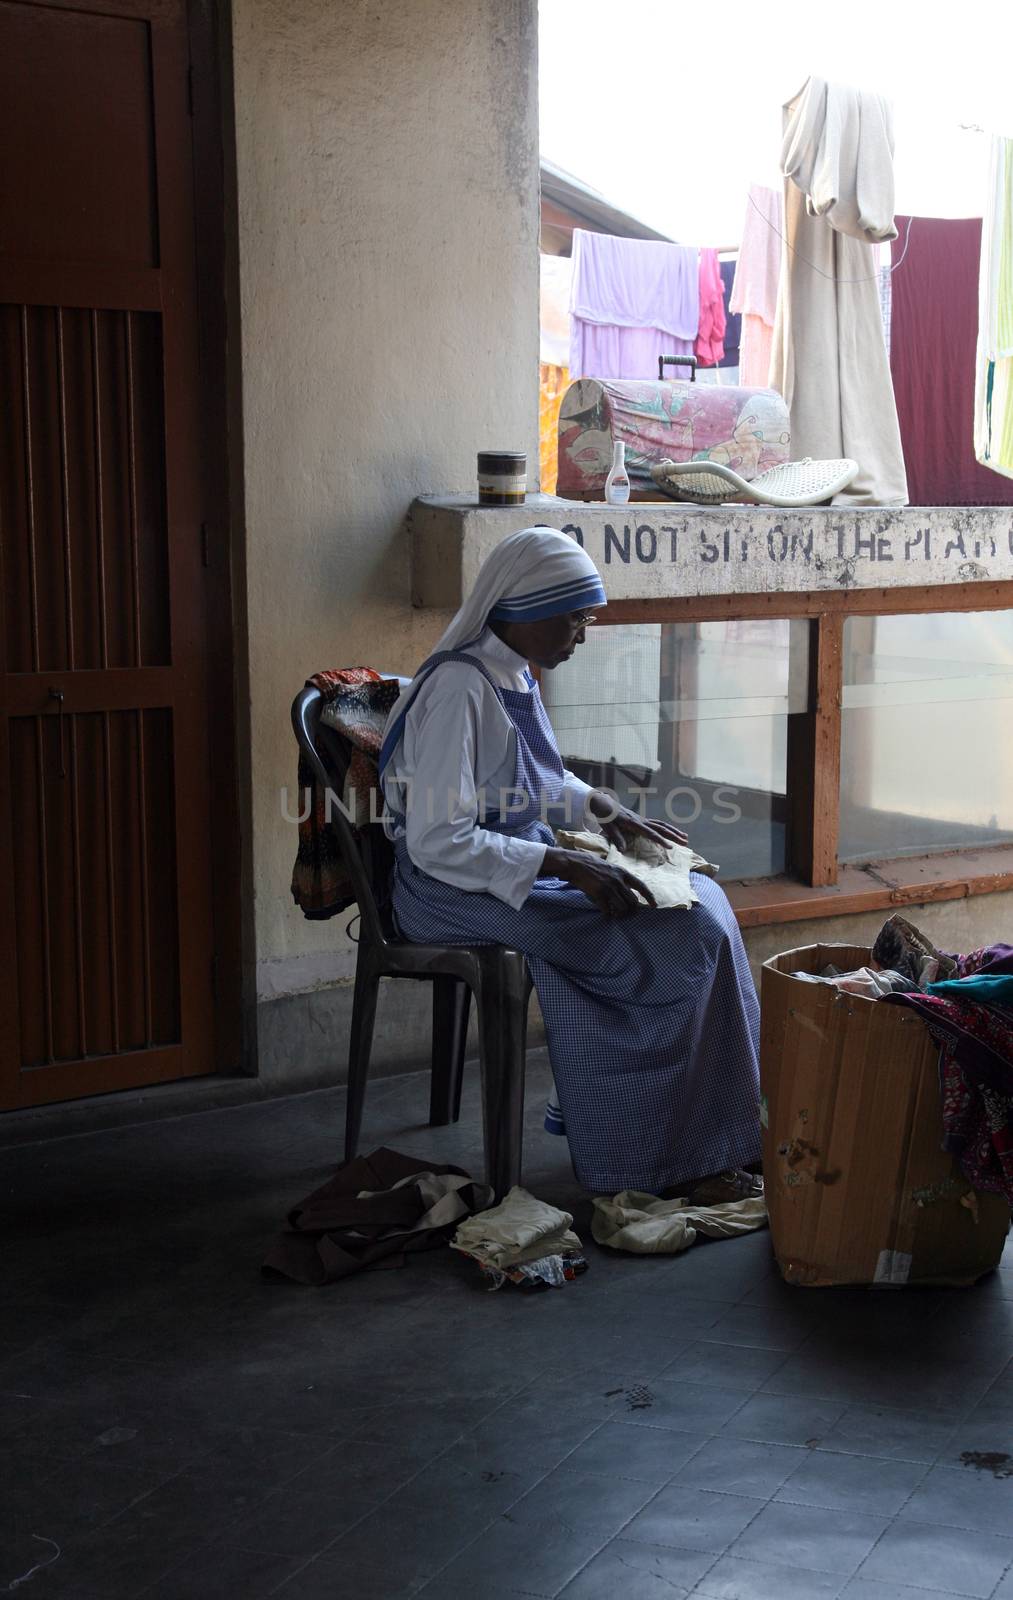 Sister of Missionaries of Charity classified the goods they have received from charitable organizations in Kolkata by atlas